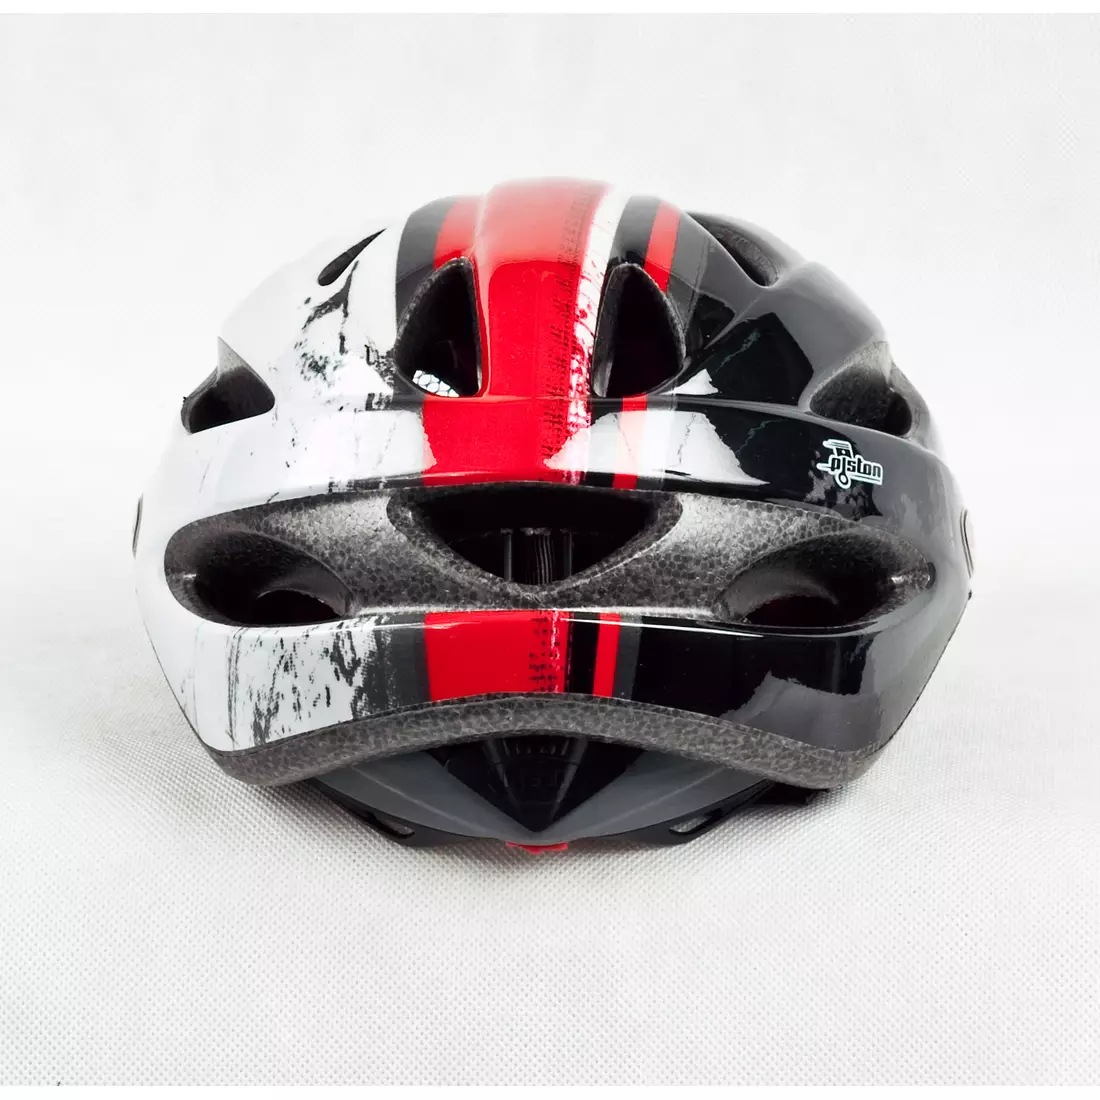 BELL PISTON bicycle helmet, black and red